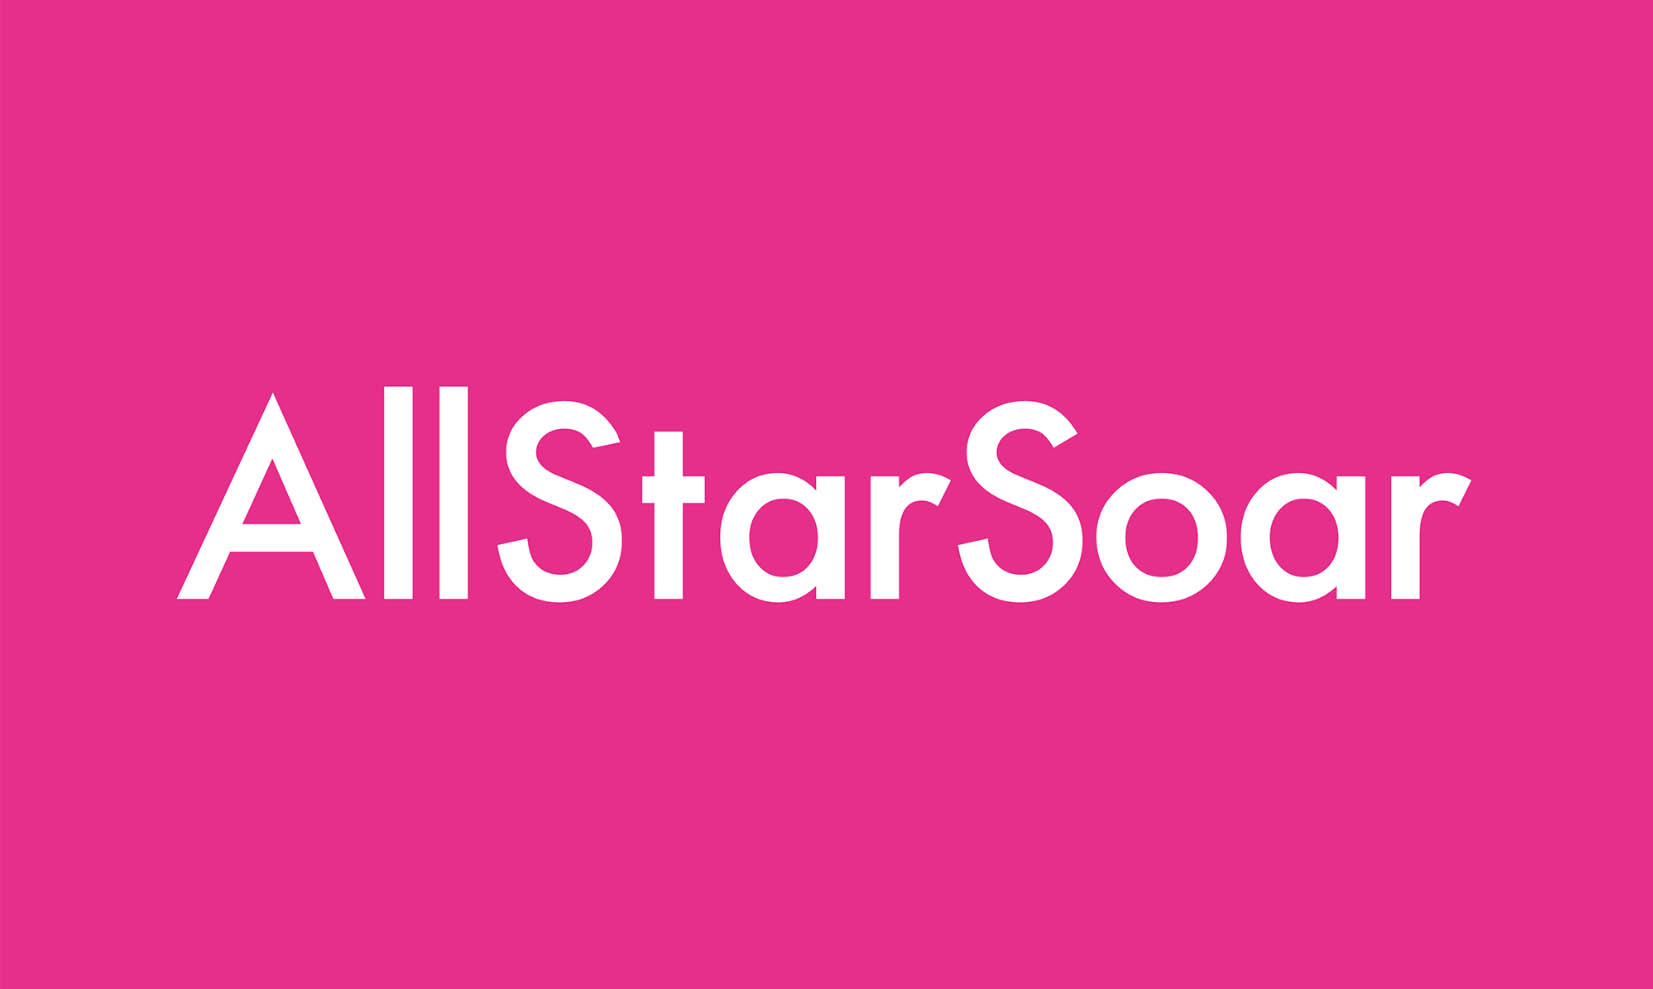 Visual identity for All Star Soar promoting brands in sports and lifestyle